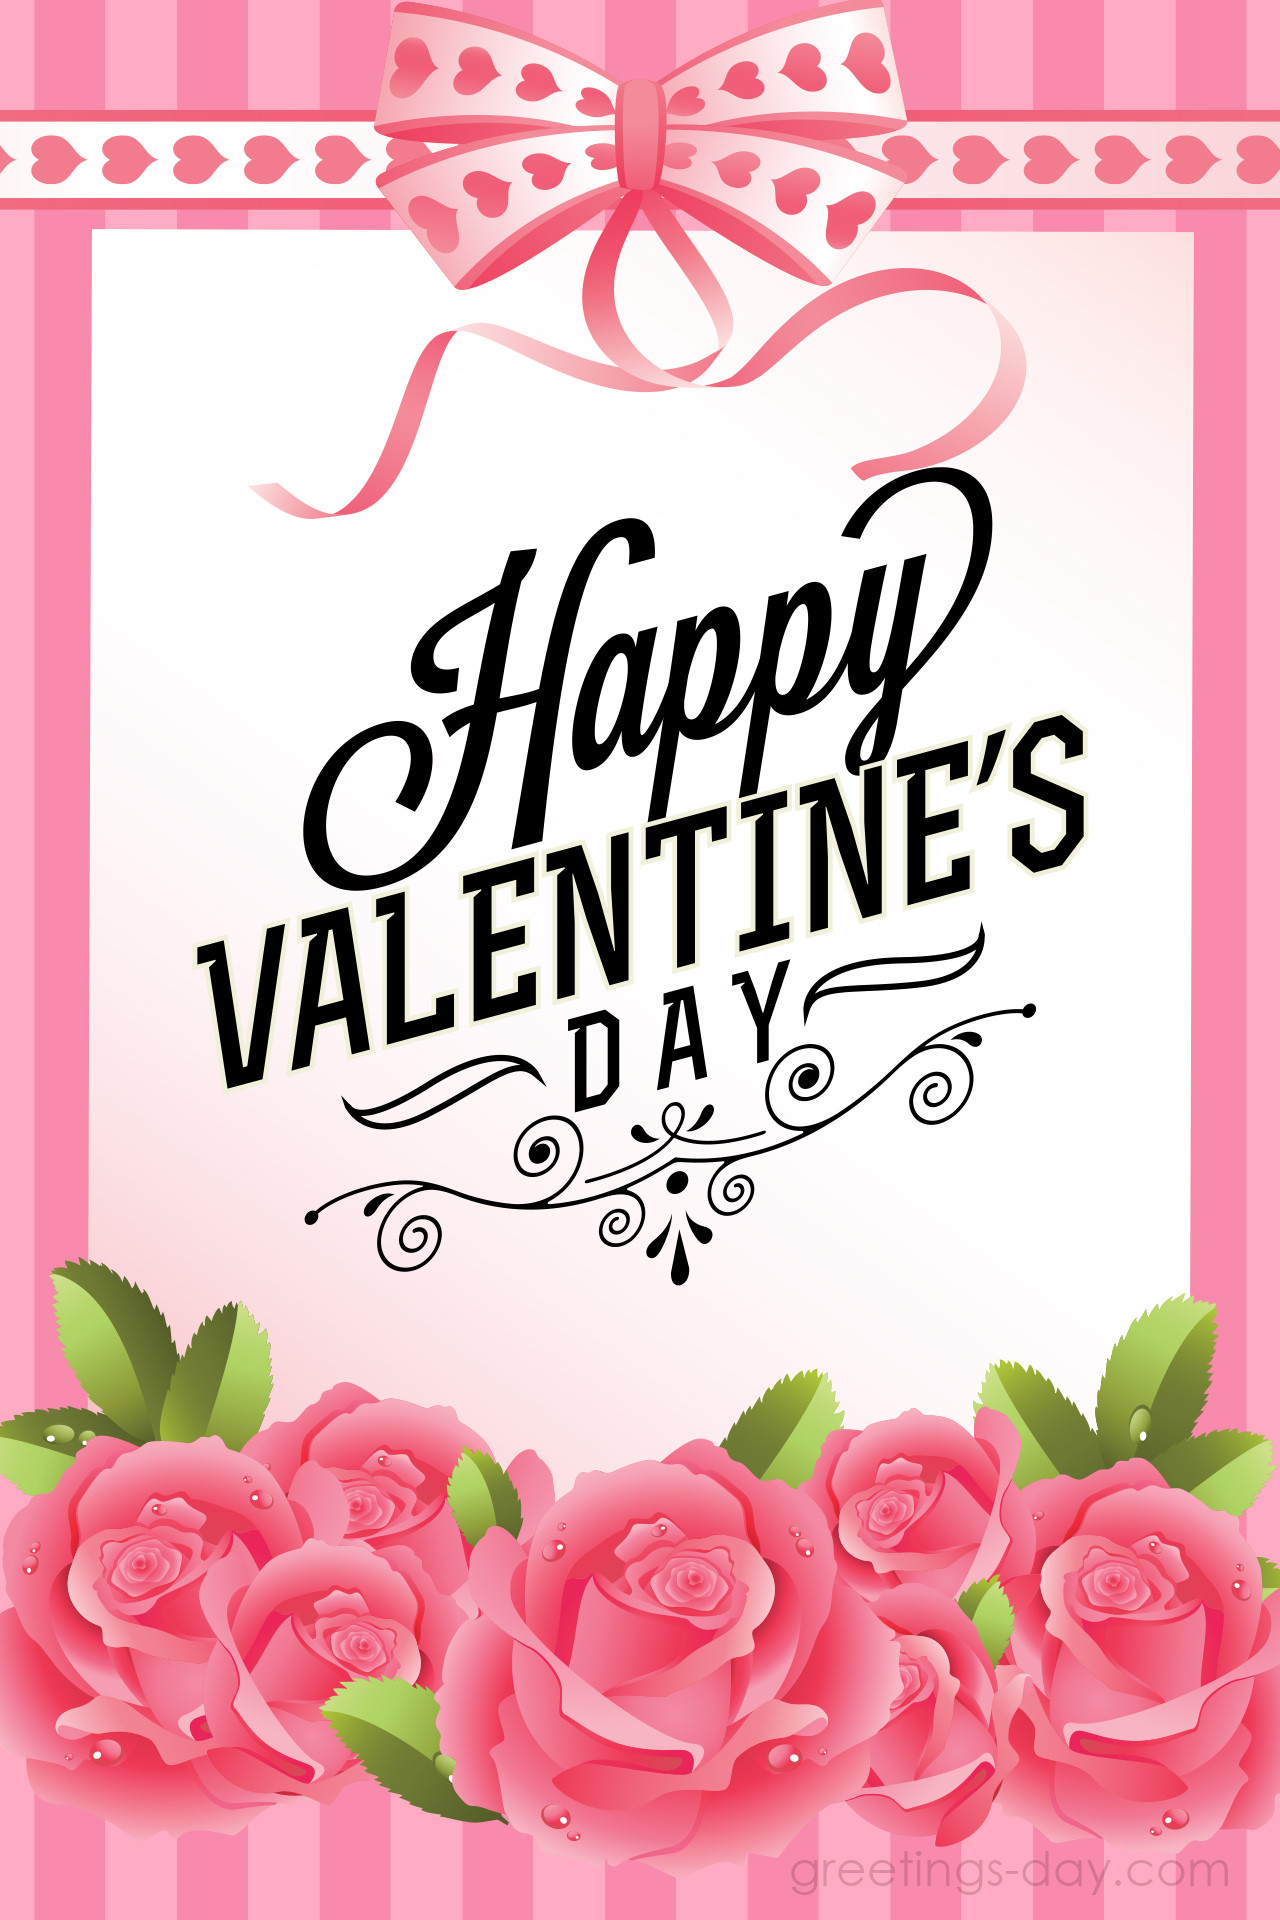 Quotes Valentines Day
 Valentine s Day Quotes and Flowers for Friends and Family